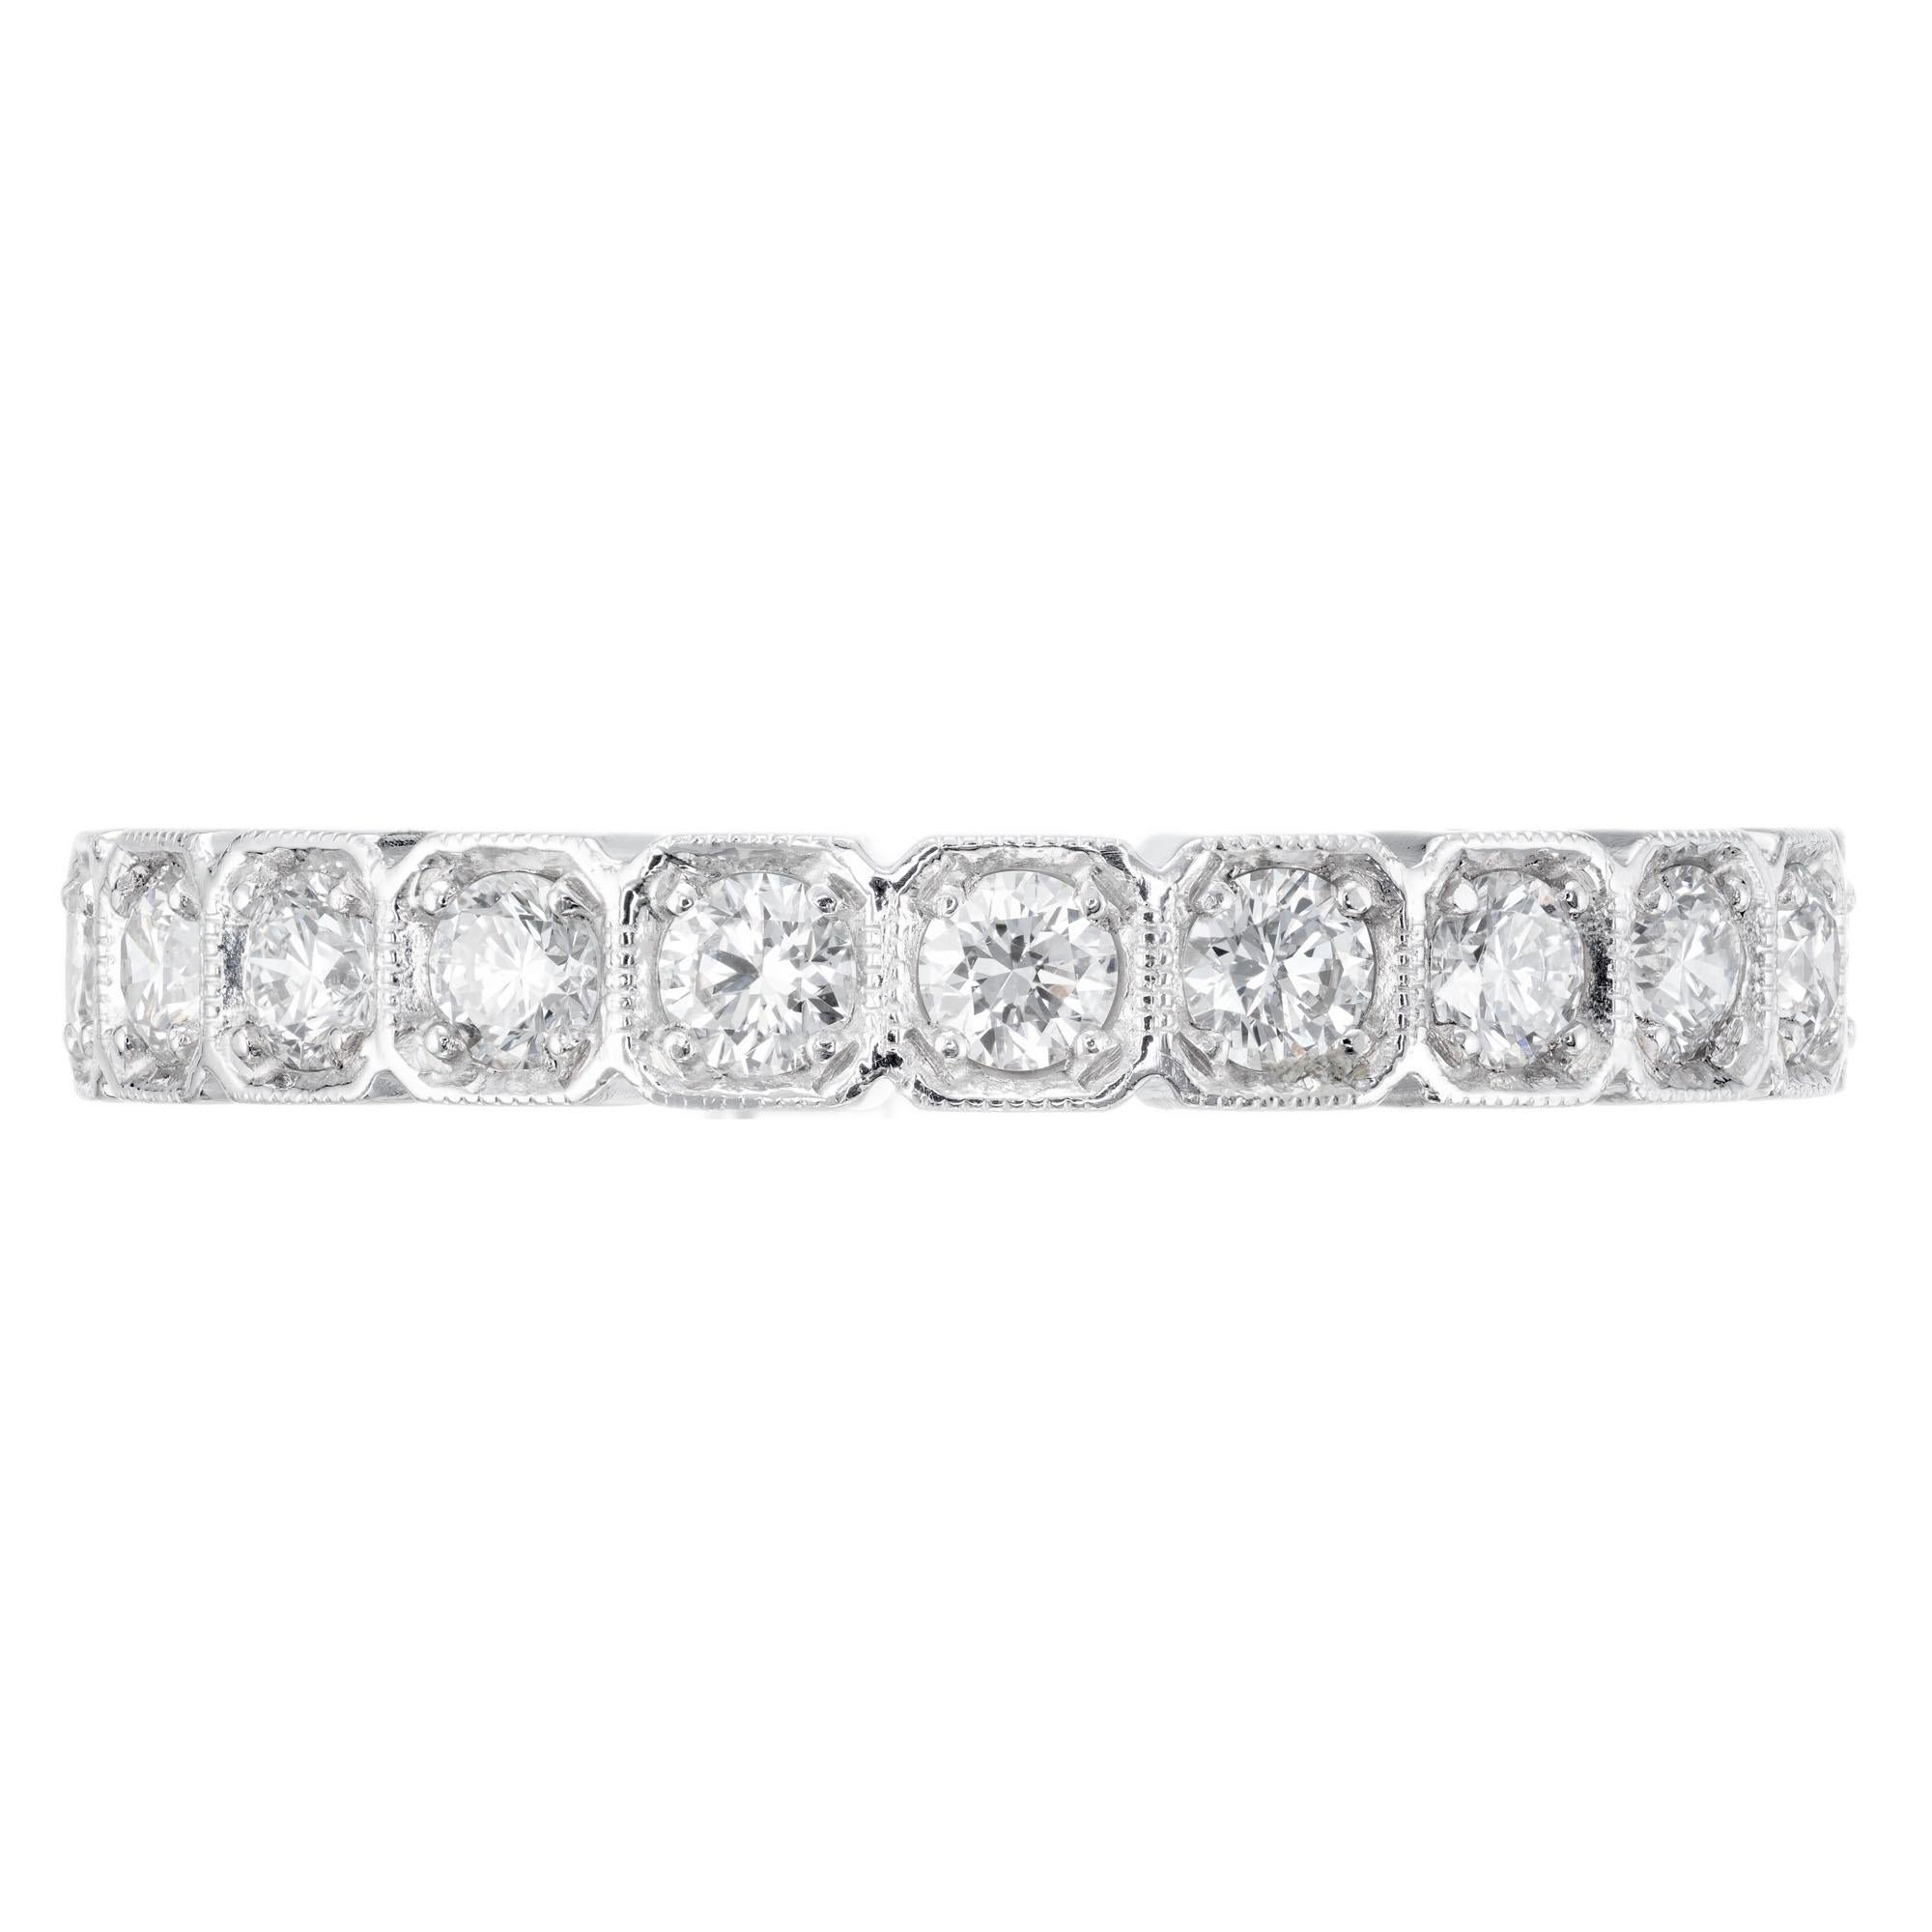 15 round diamond wedding band ring in Platinum. 1920's Art Deco style design, created in the Peter Suchy Workshop.

15 round brilliant cut diamonds, approx. total weight .75cts, F, VS
Size 6 1/2 and sizable
Platinum
Stamped: Plat
6.3 grams
Width at